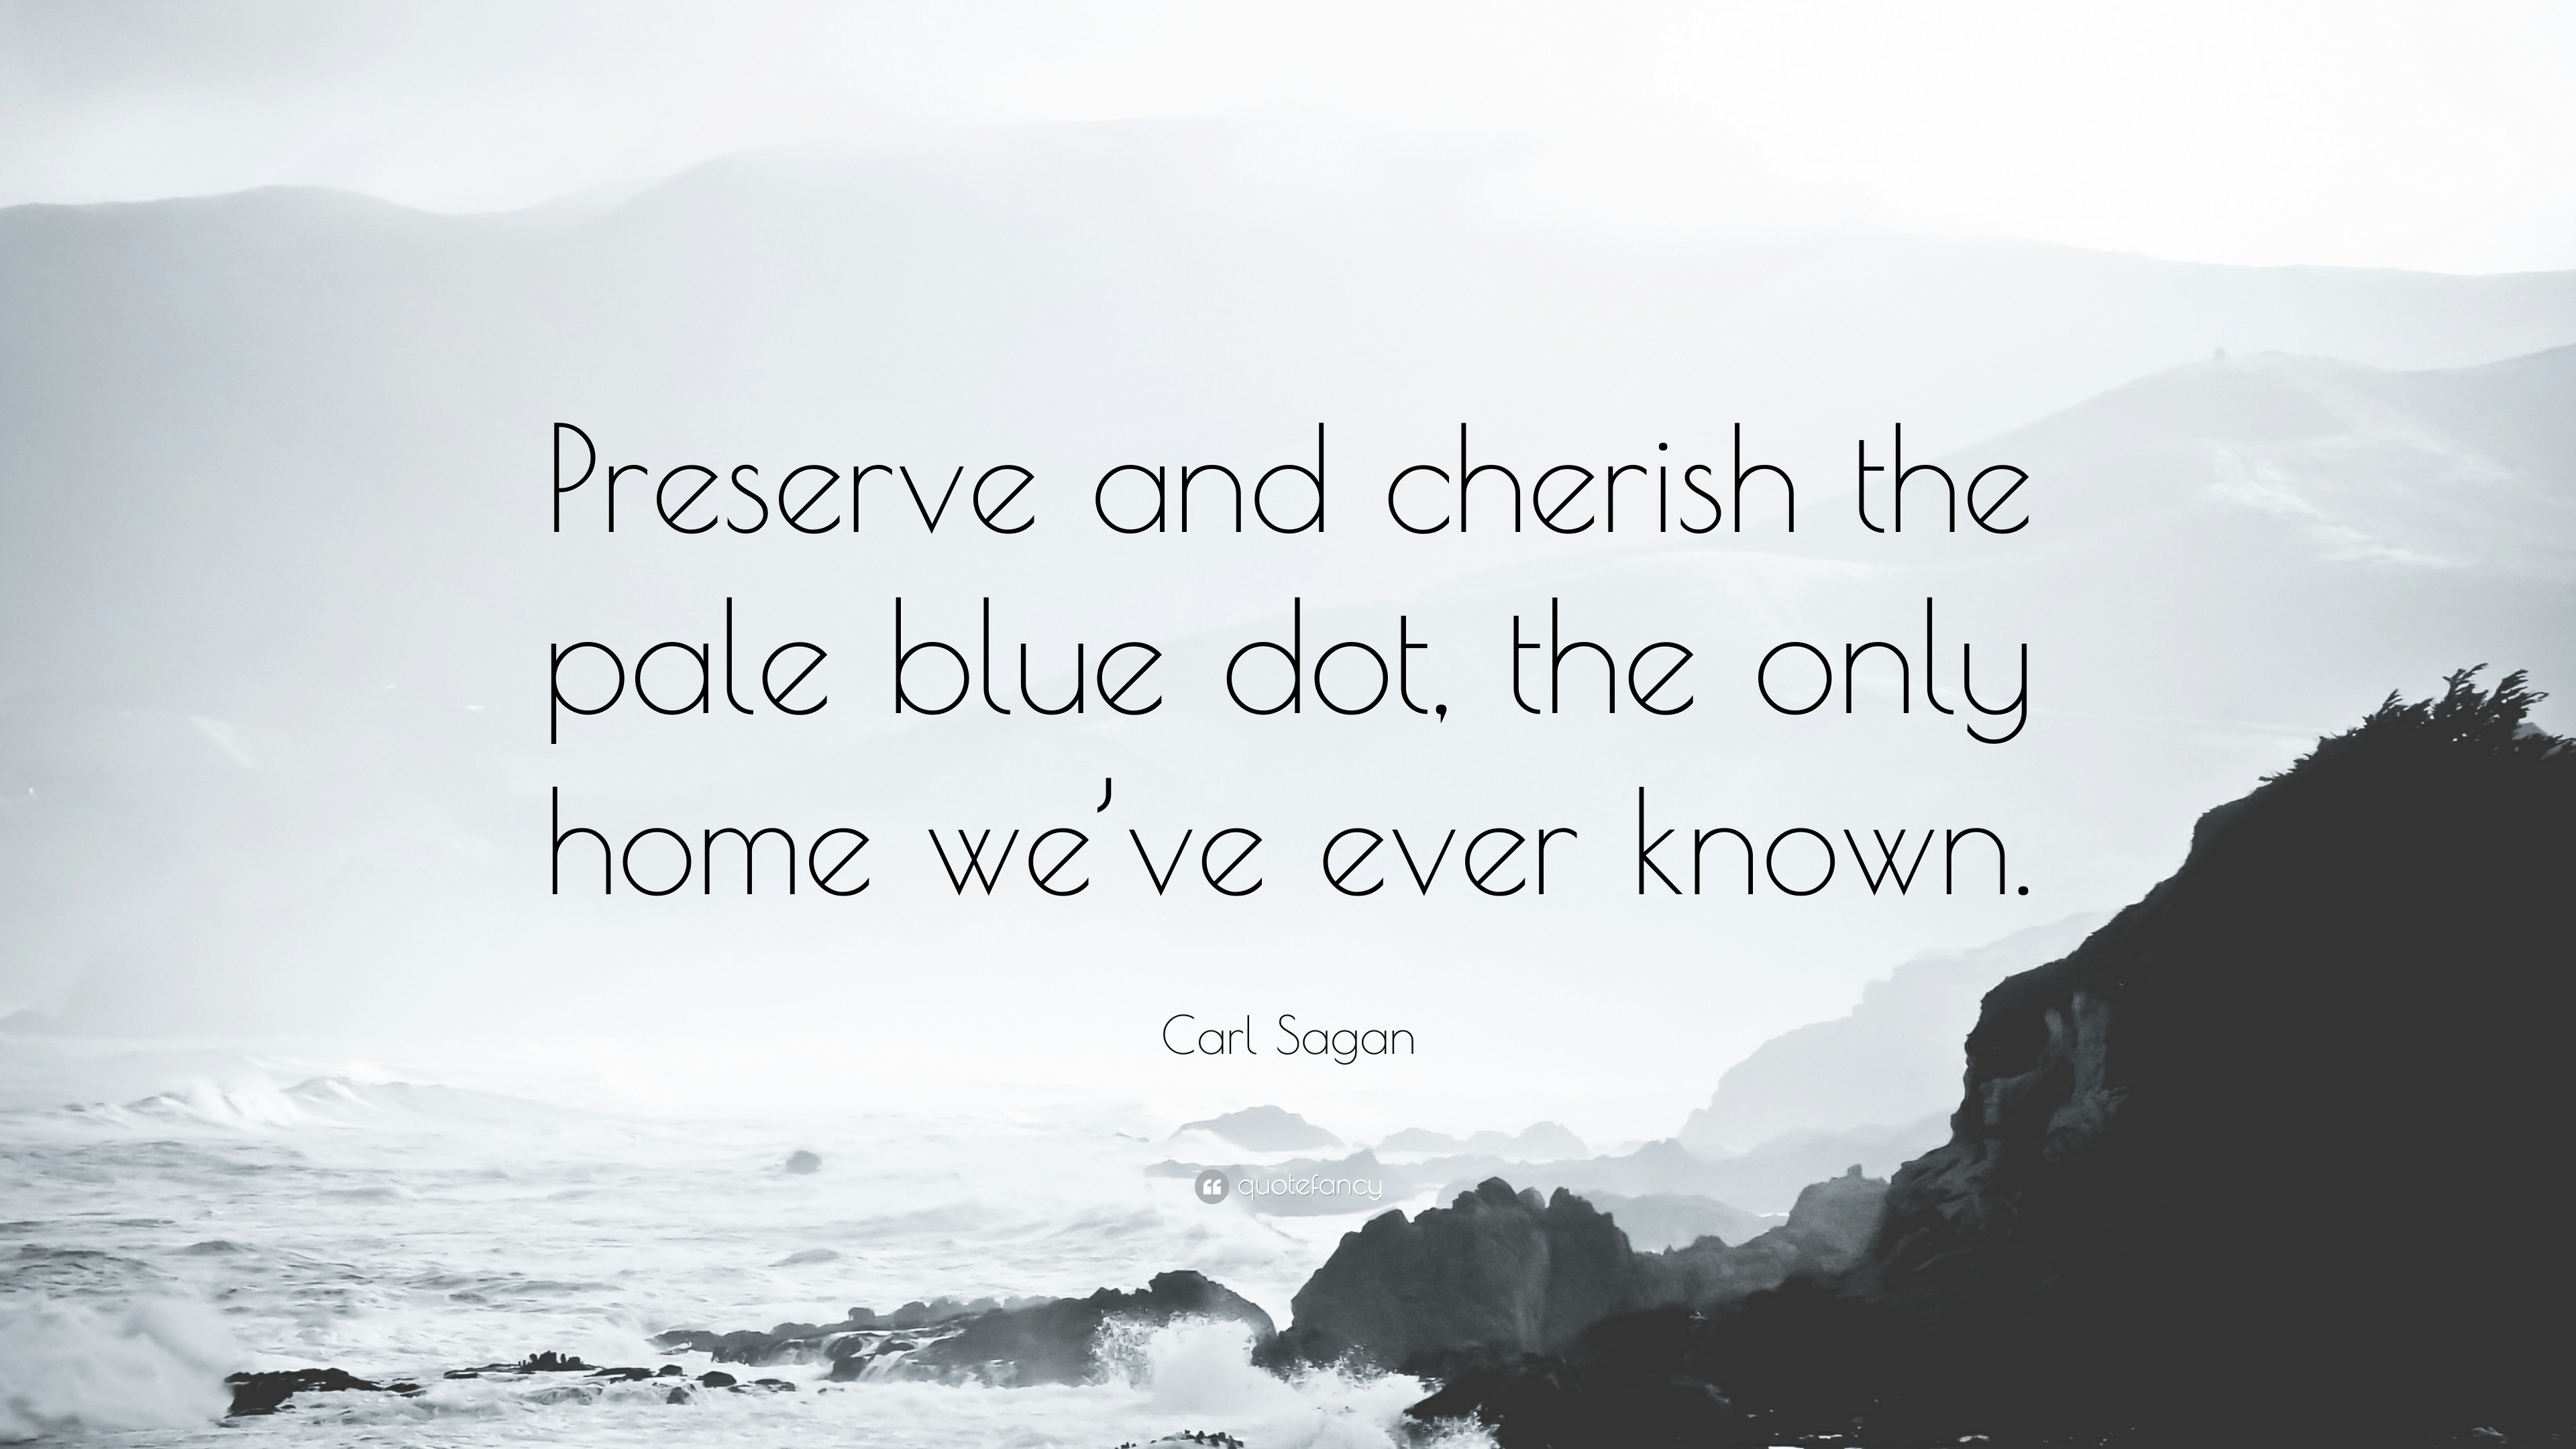 Carl Sagan Quote Preserve and cherish the pale blue dot, the only home